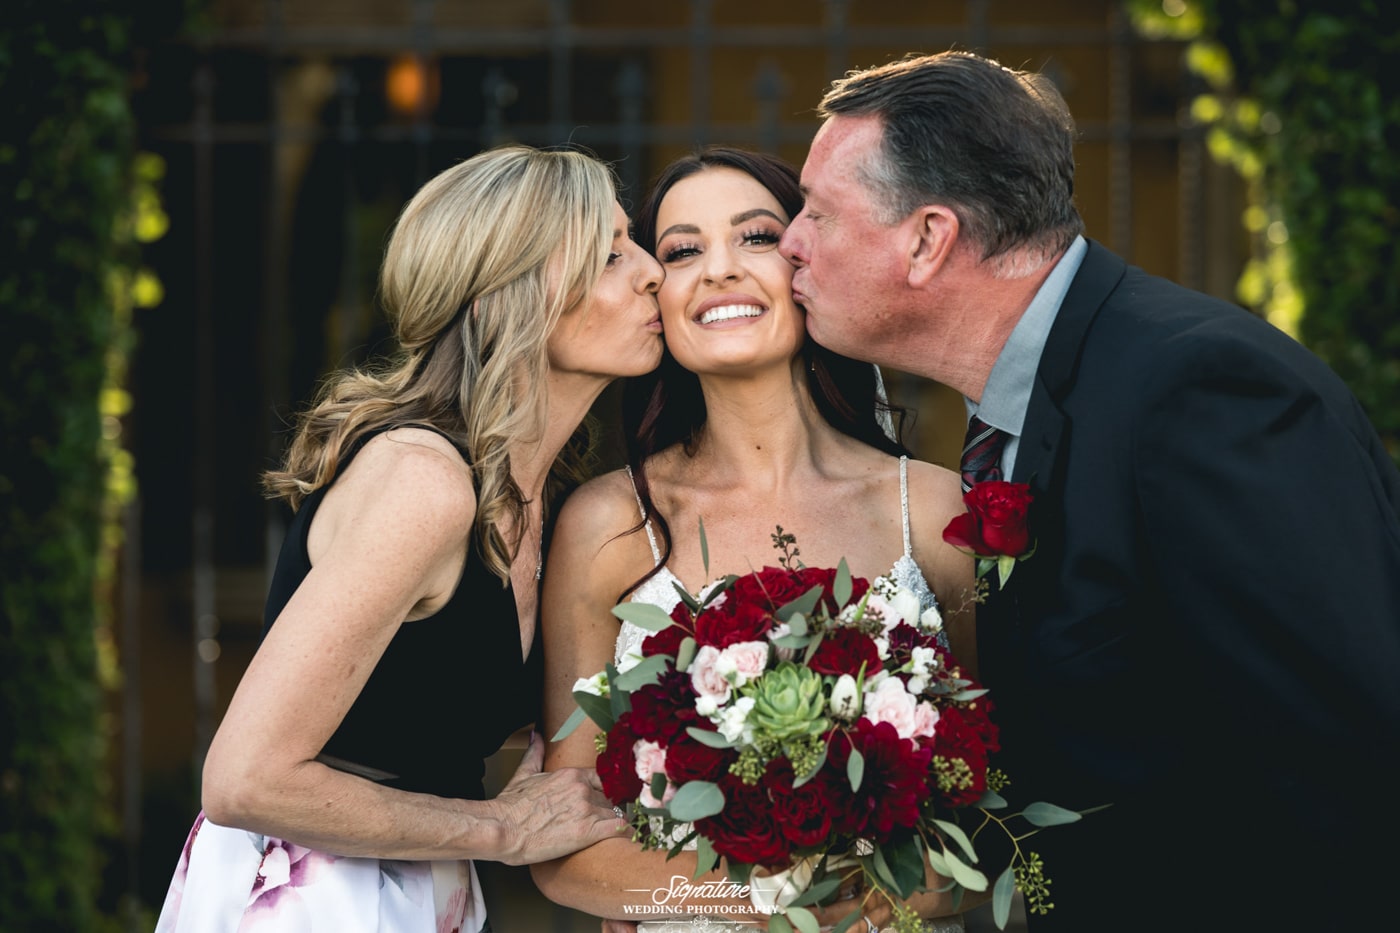 Mother and father kissing bride on cheek